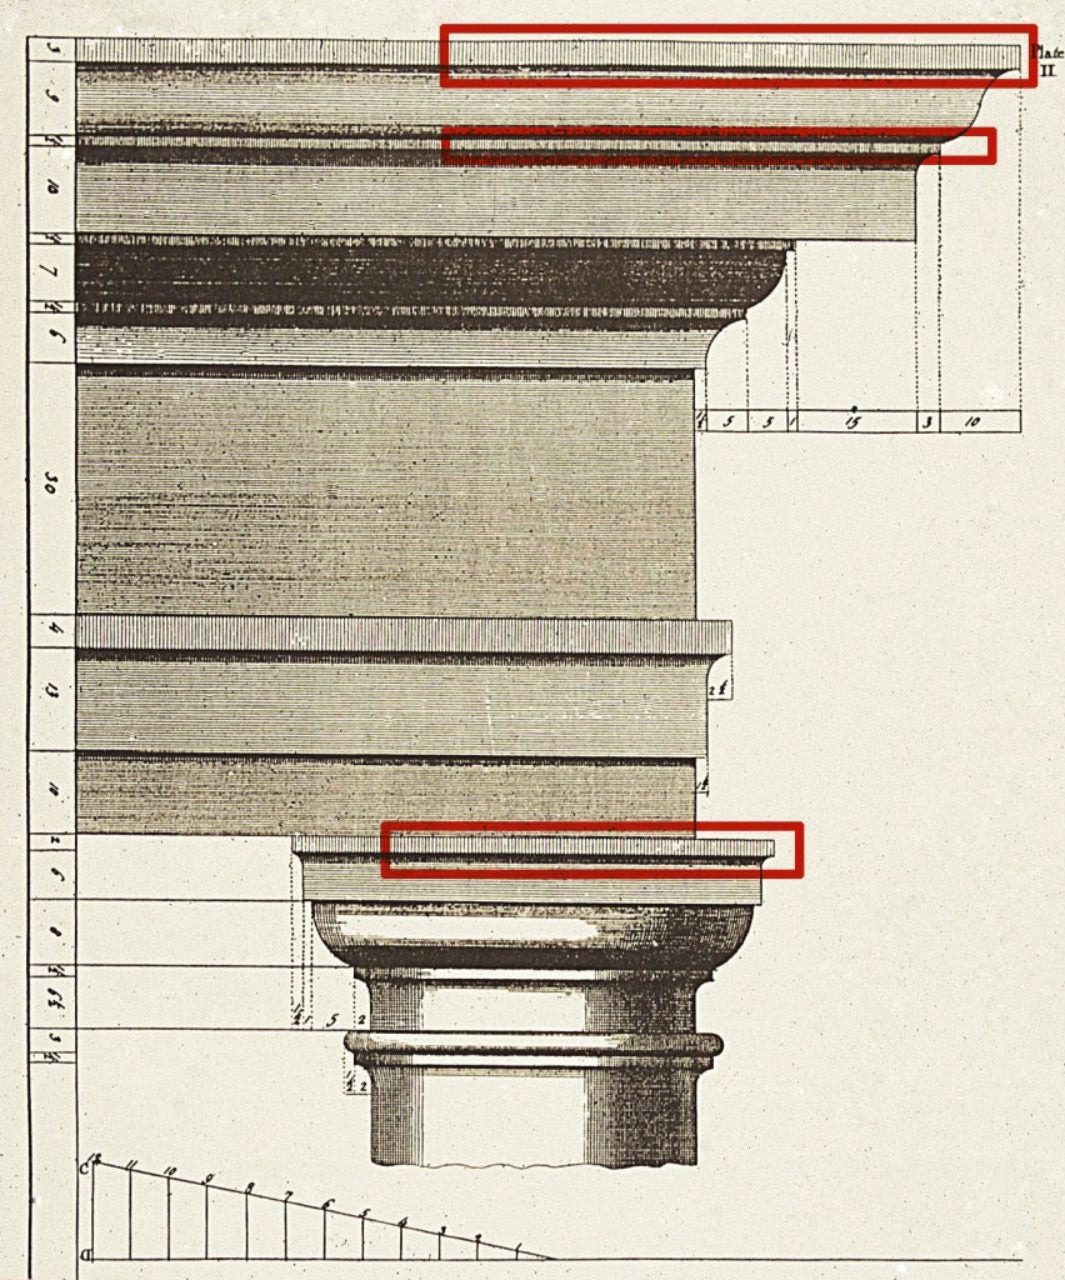 Fillet Classical Definition - Illustrated Glossary of Architectural Terms by Brockwell Incorporated